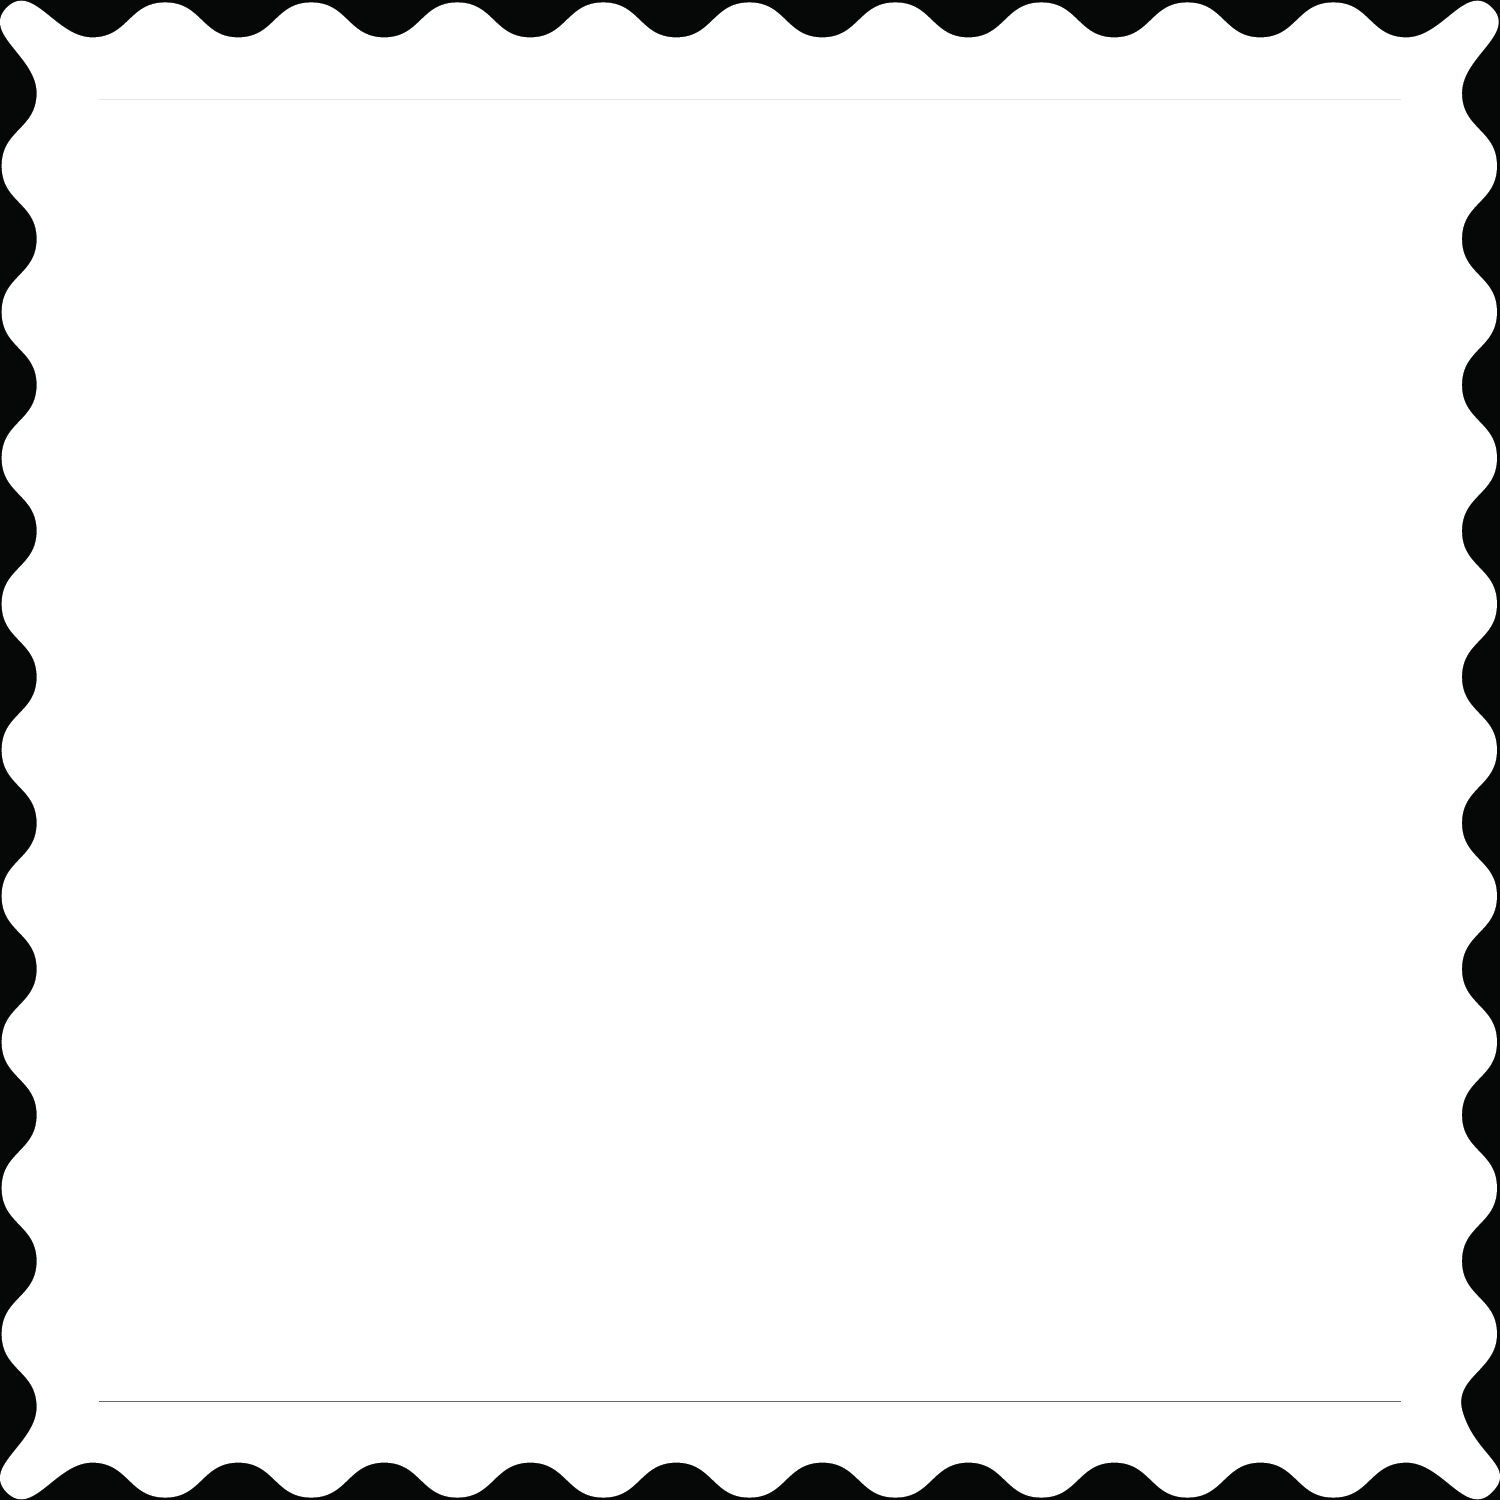 Free Png Frames Black, Download Free Clip Art, Free Clip Art on Clipart